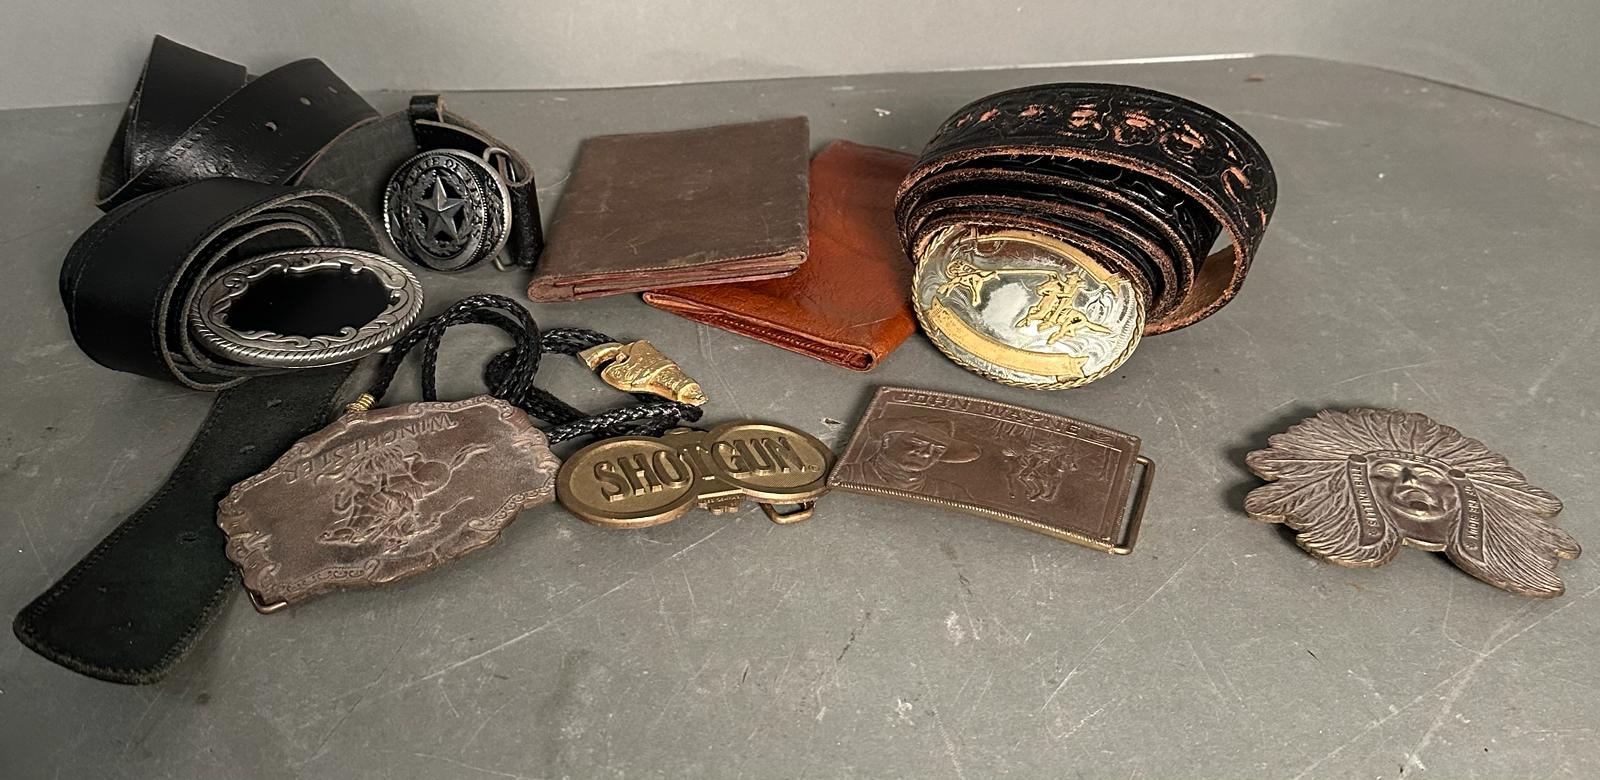 A selection of vintage leather goods and belt buckles to include cowboy belts, wallets and a